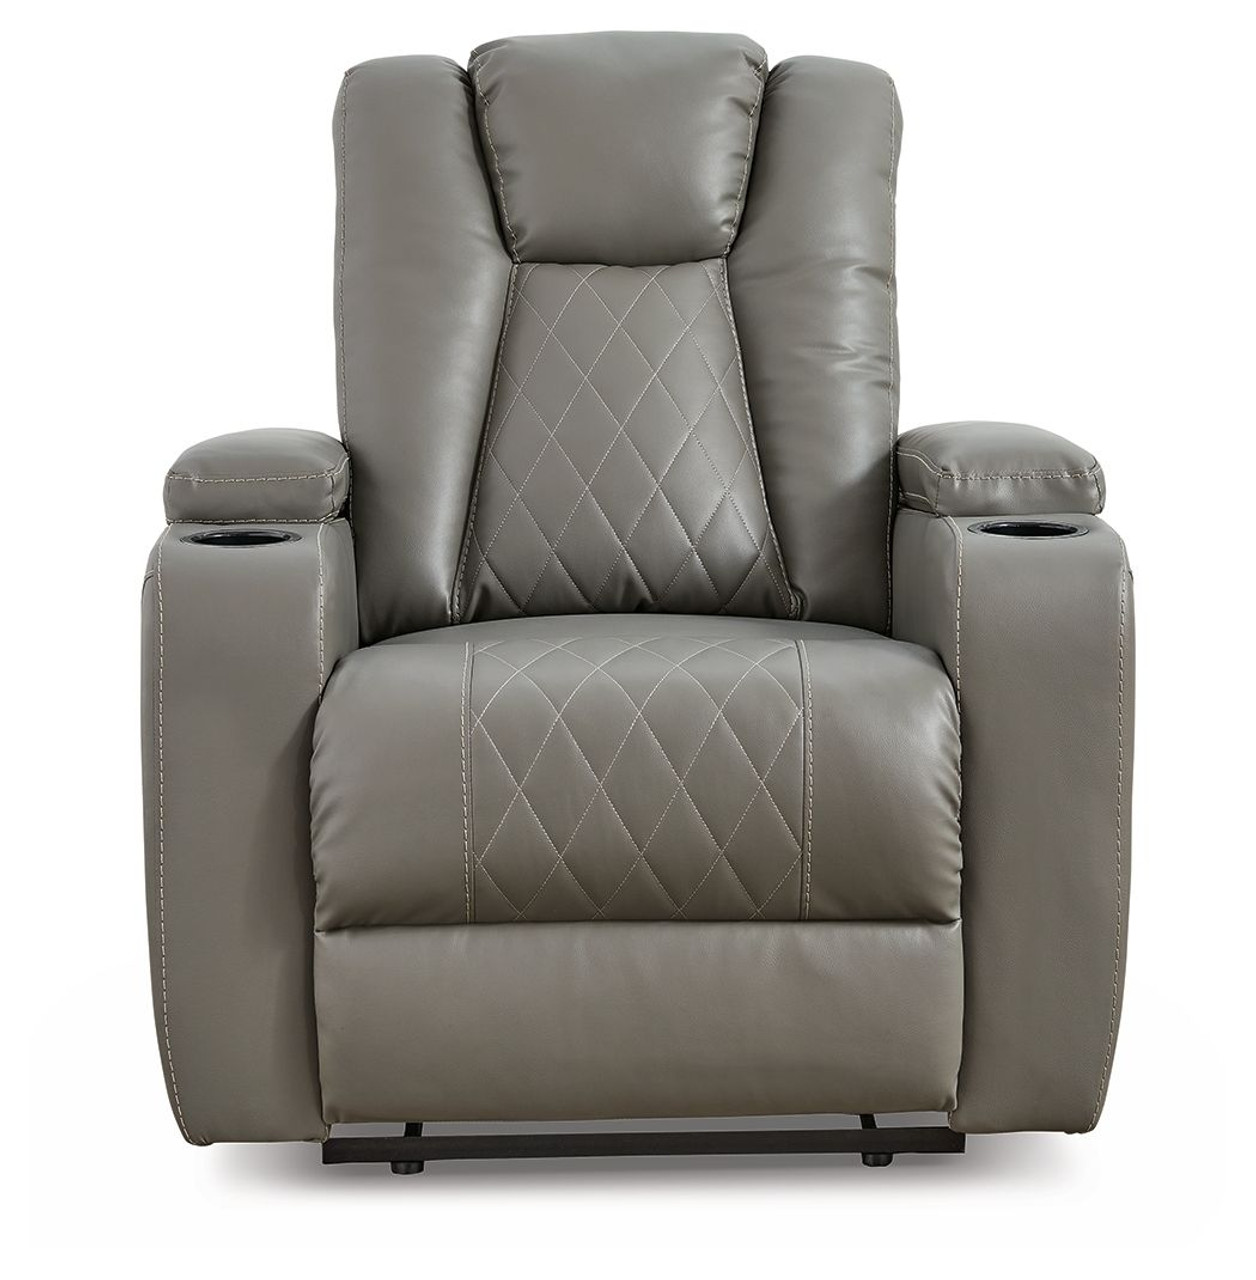 The Clonmel Chocolate Zero Wall Power Wide Recliner is available at  Complete Suite Furniture, serving the Pacific Northwest.